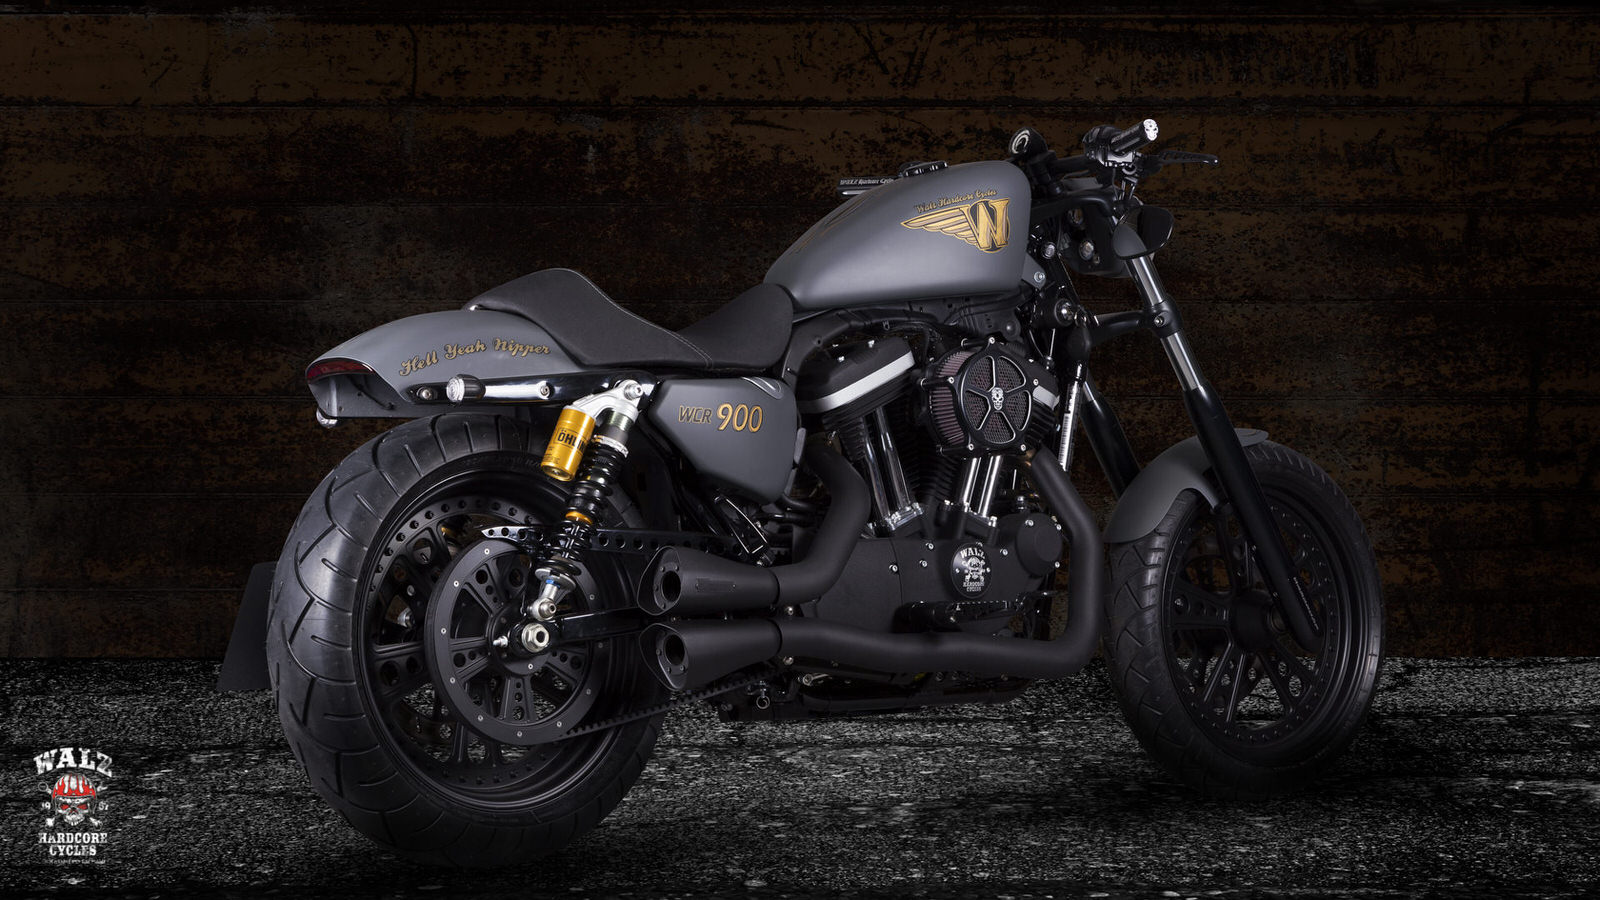 Harley-Davidson Sportster ‘WCR 900’ by Walz Cycles